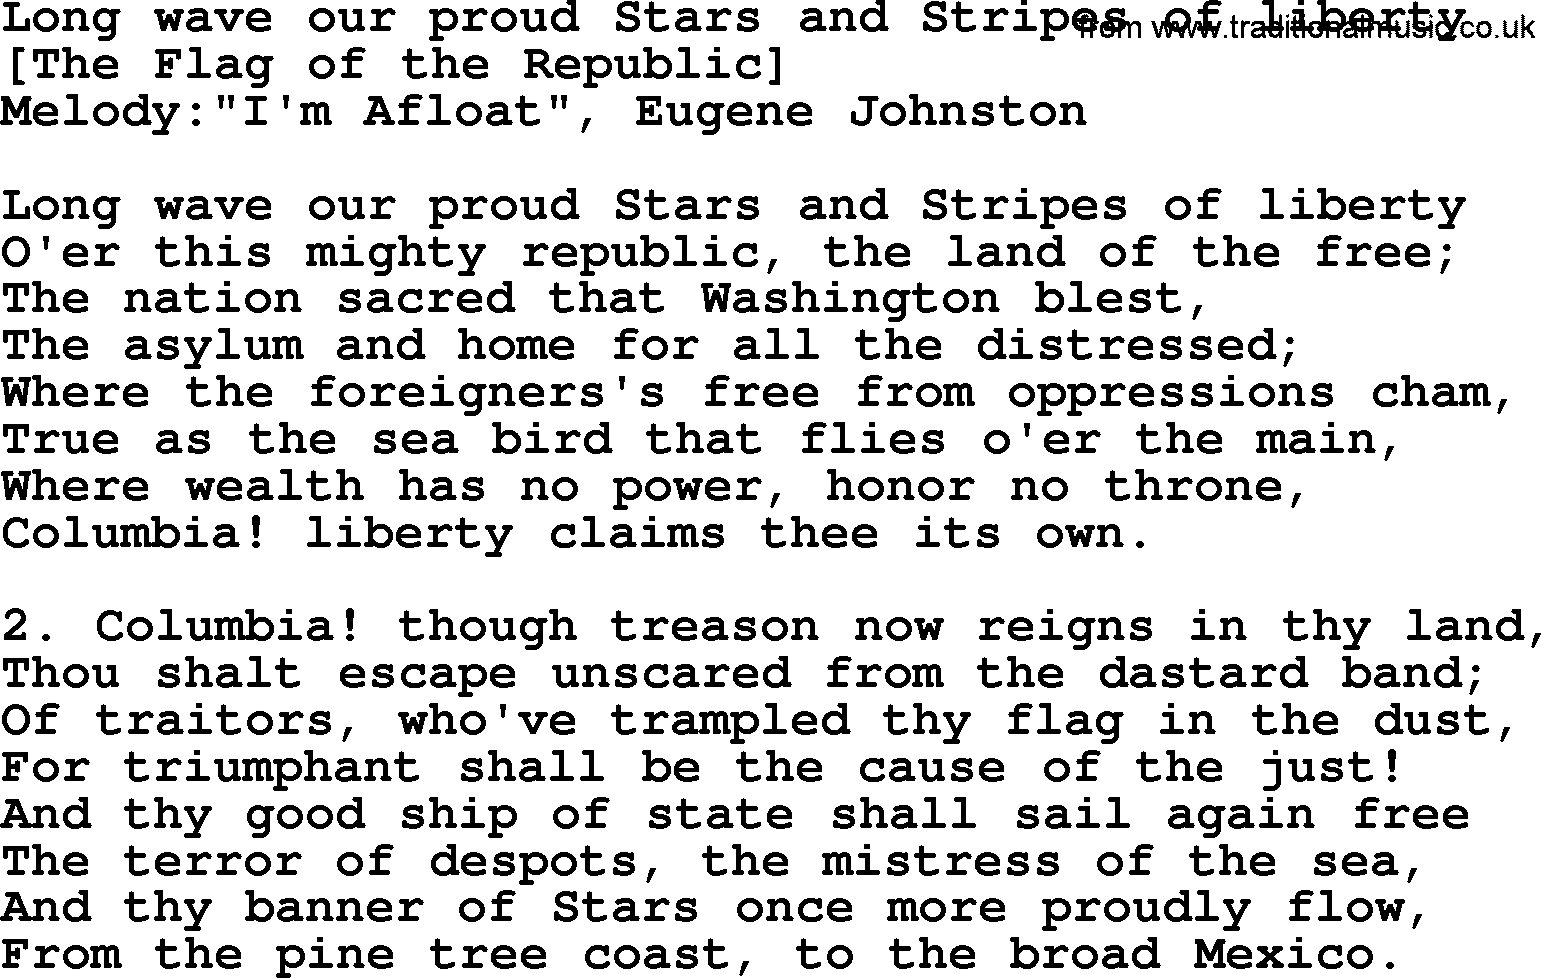 Old American Song: Long Wave Our Proud Stars And Stripes Of Liberty, lyrics